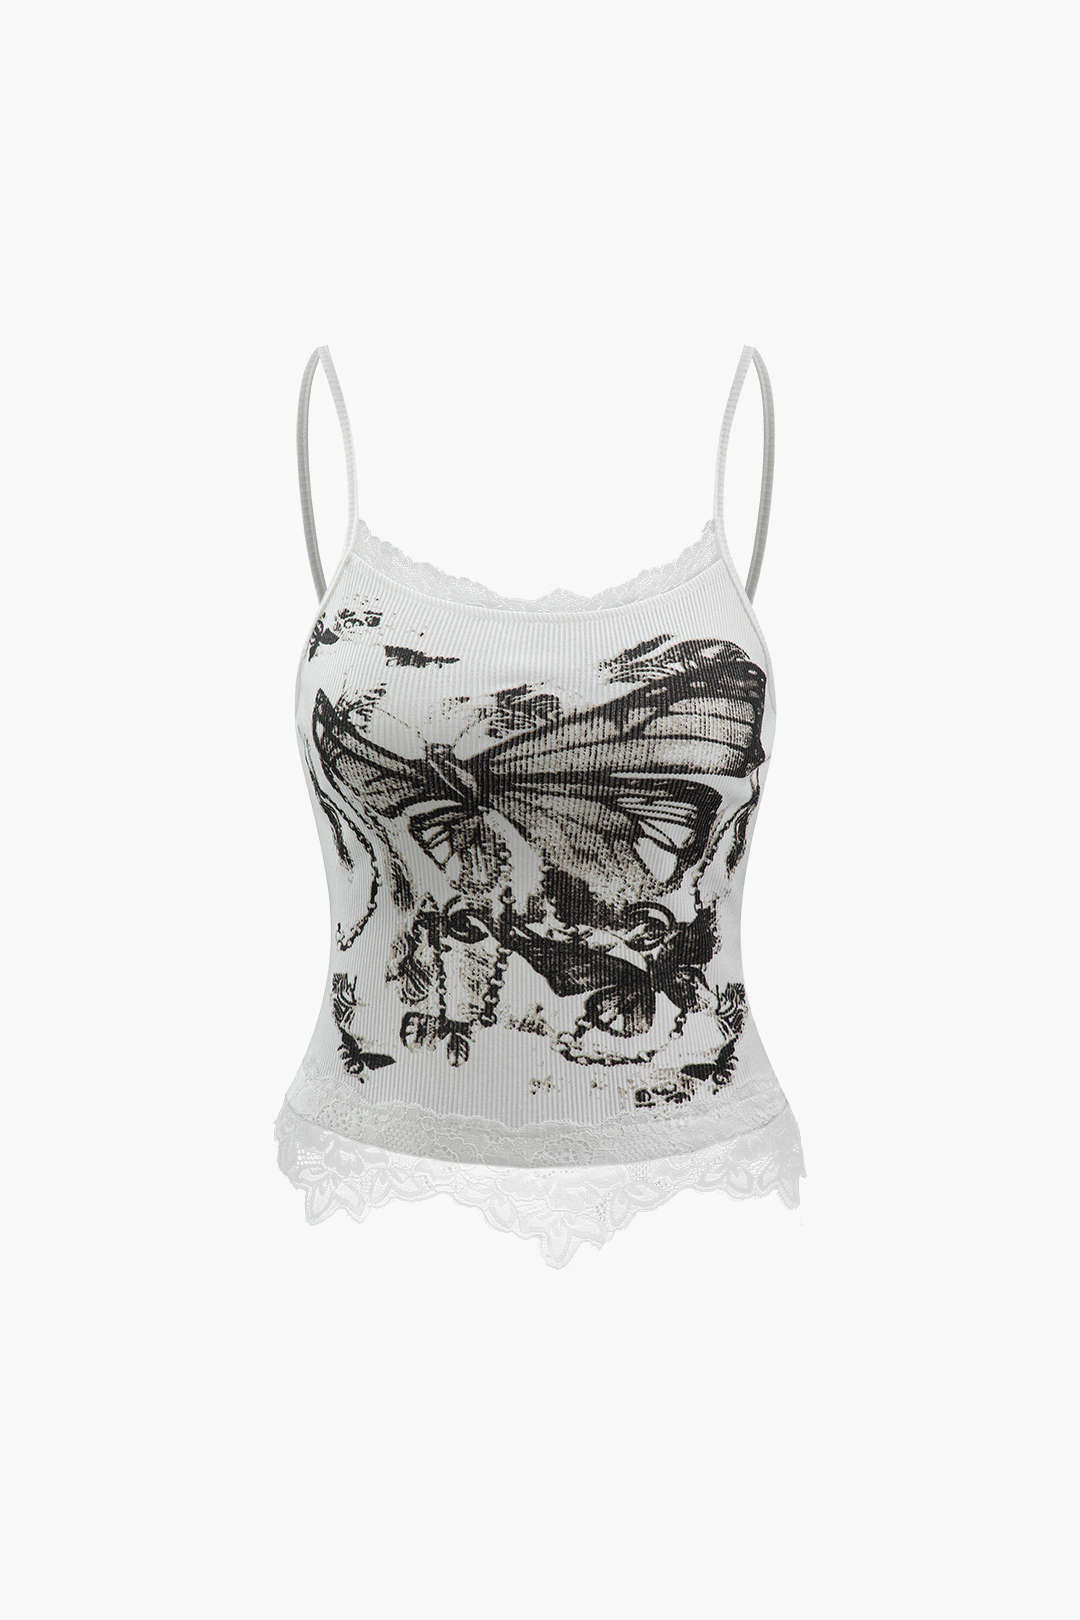 Butterfly Print Lace Trim Cami Top